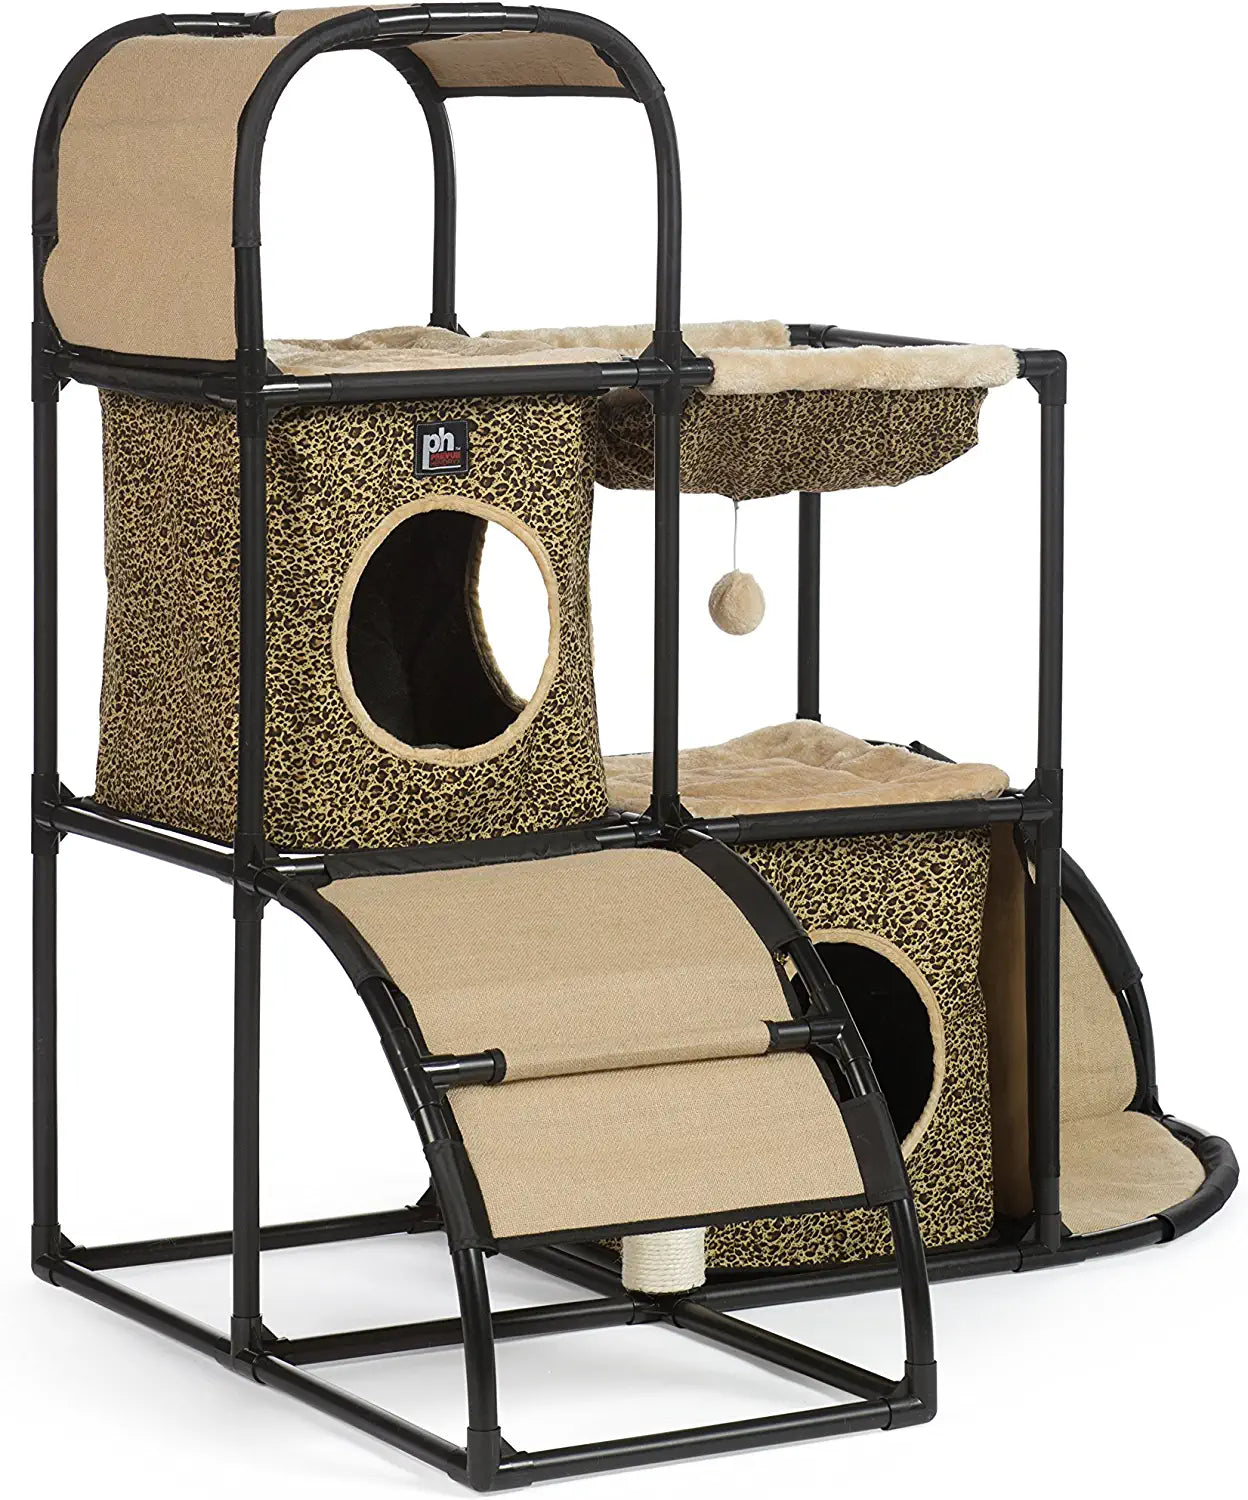 Prevue Pet Products Catville Townhome, Leopard Print, 7235